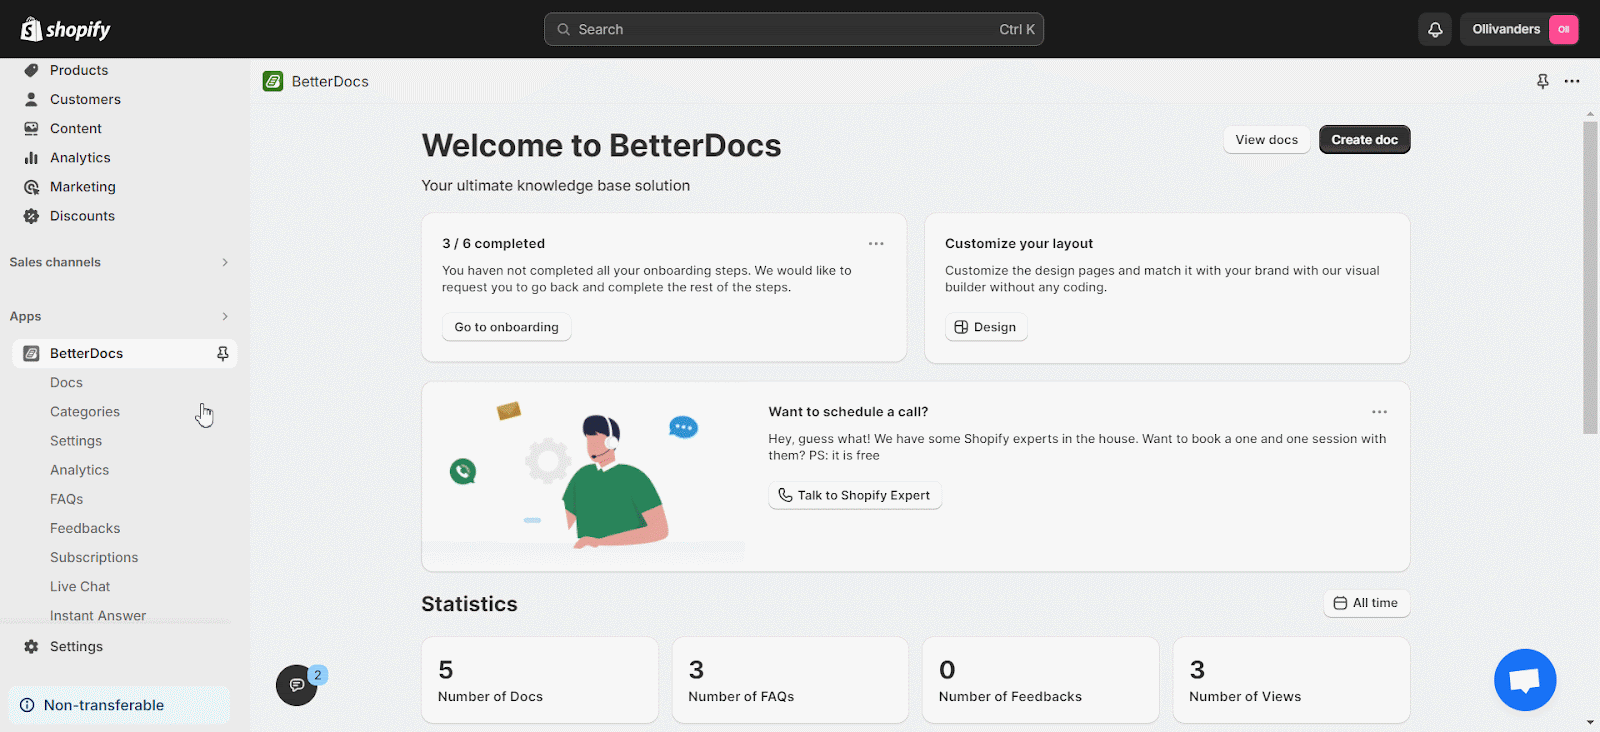 How To Design A Knowledge Base For Shopify With BetterDocs?